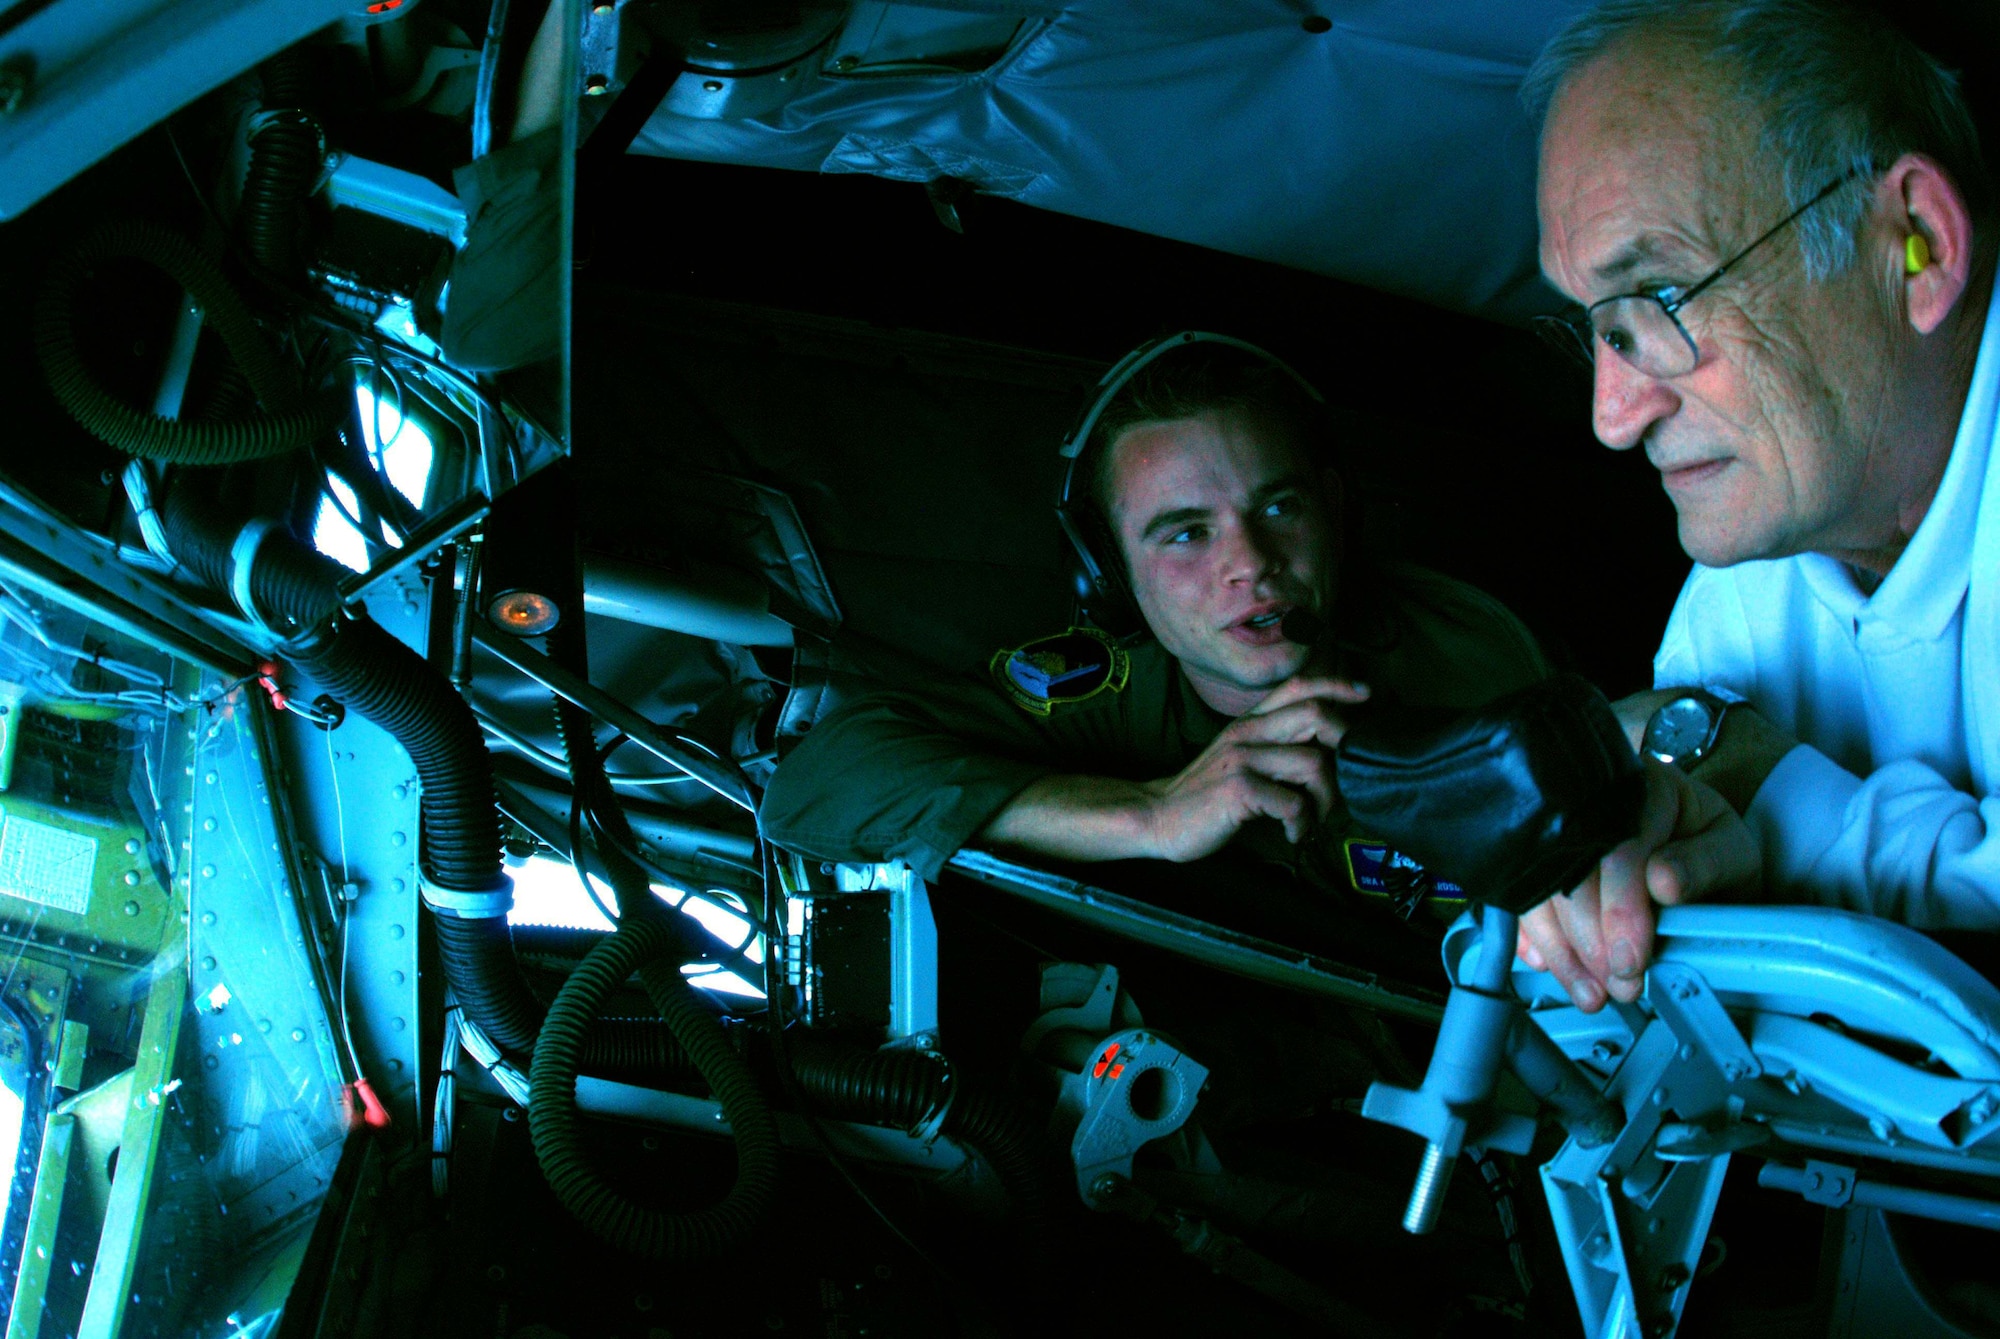 Senior Airman Geoffrey Richardson, 756th Air Refueling Squadron boom operator, explain controls and his responsibilities to Lee Schiek, 459th Air Refueling Wing honorary commander during an orientation flight April 3. (U.S. Air Force photo/ Senior Airman Ashley Crawford)